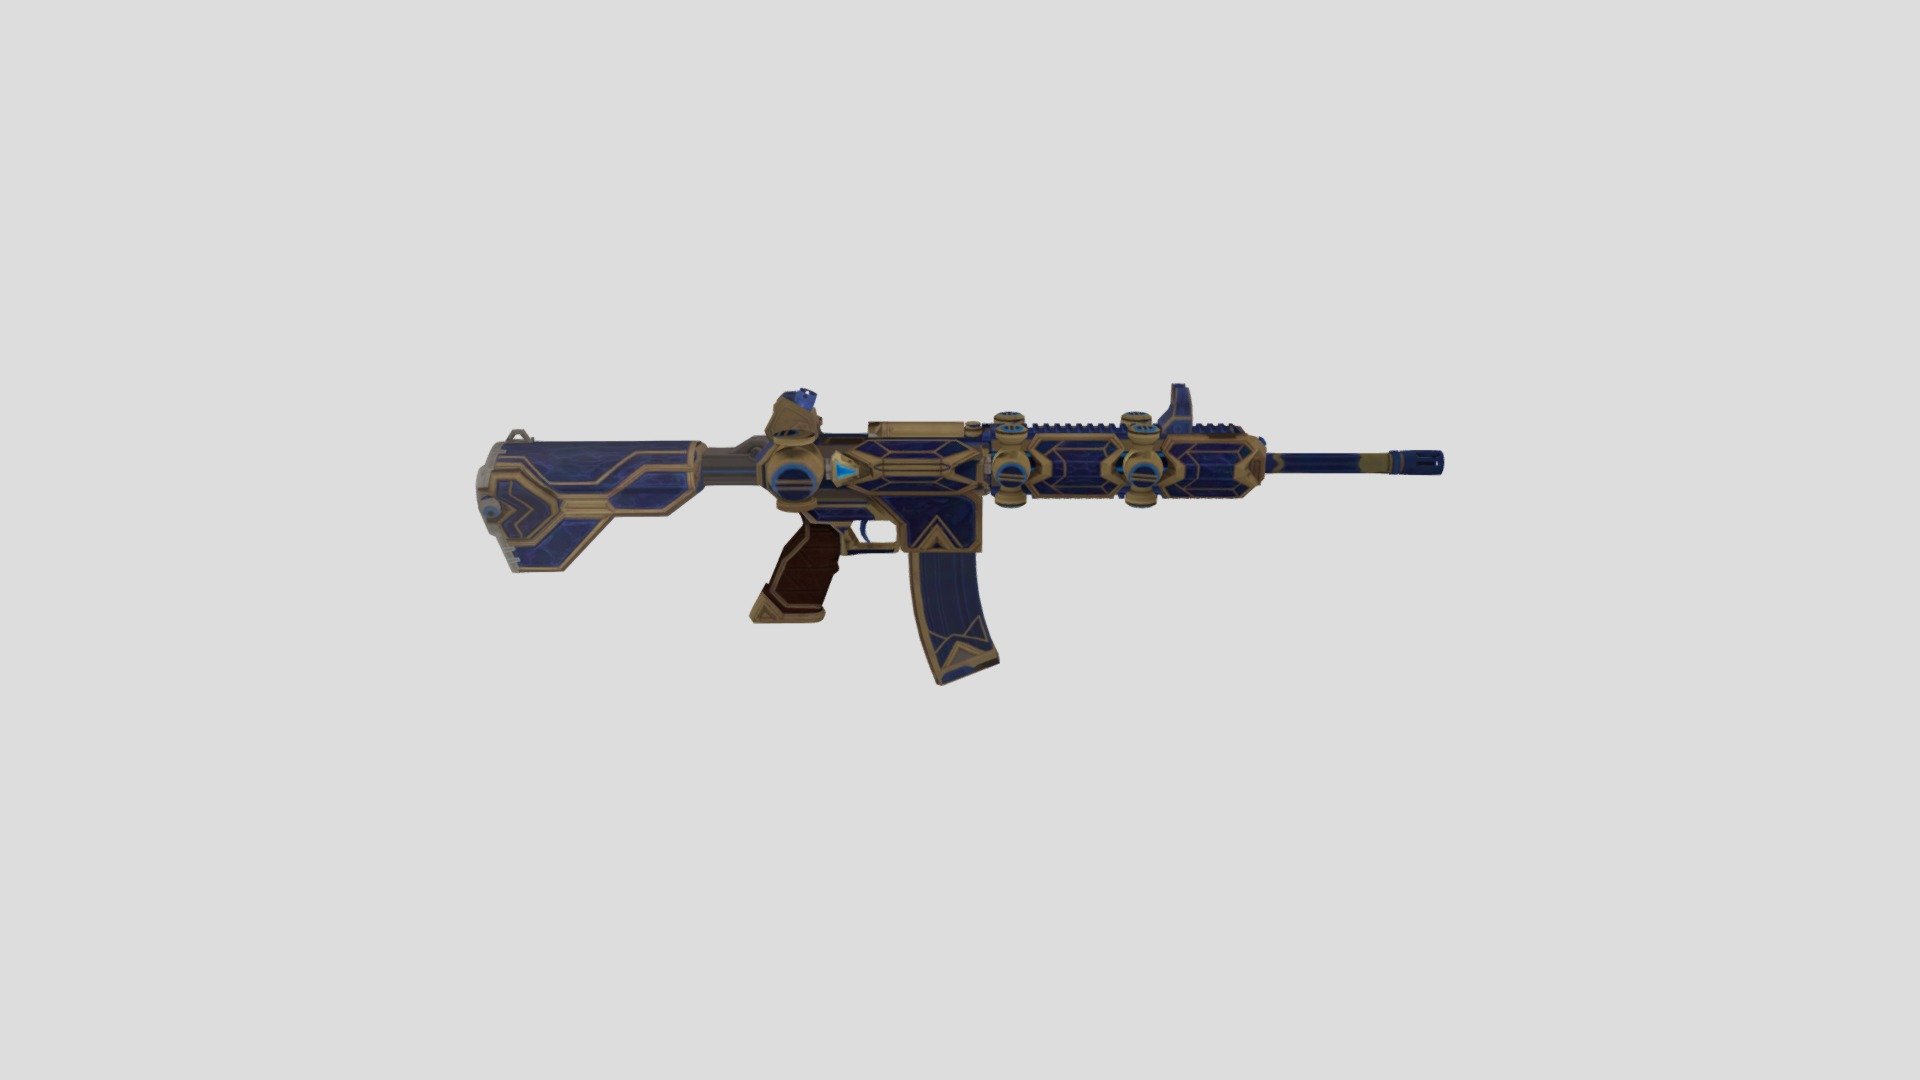 Arcane X Pubg M416 Gun Skin Download Free 3d Model By Awesome awesome 8a69bef